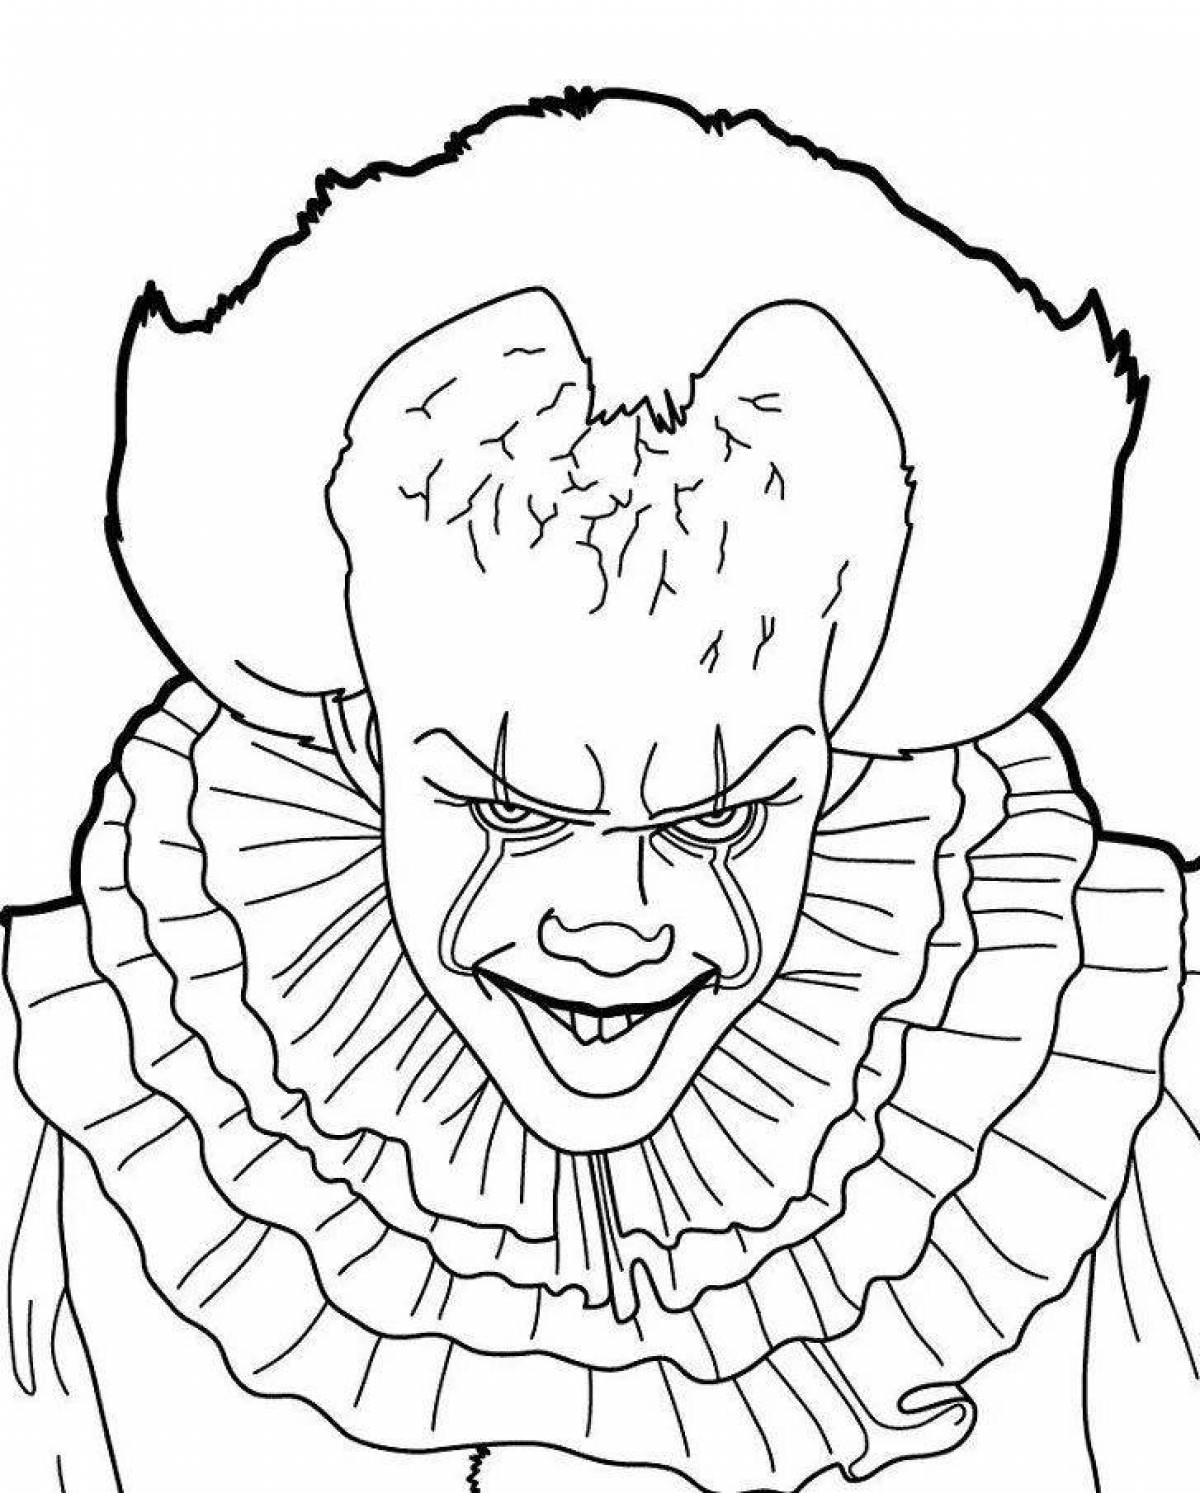 Ominous horror coloring pages for kids